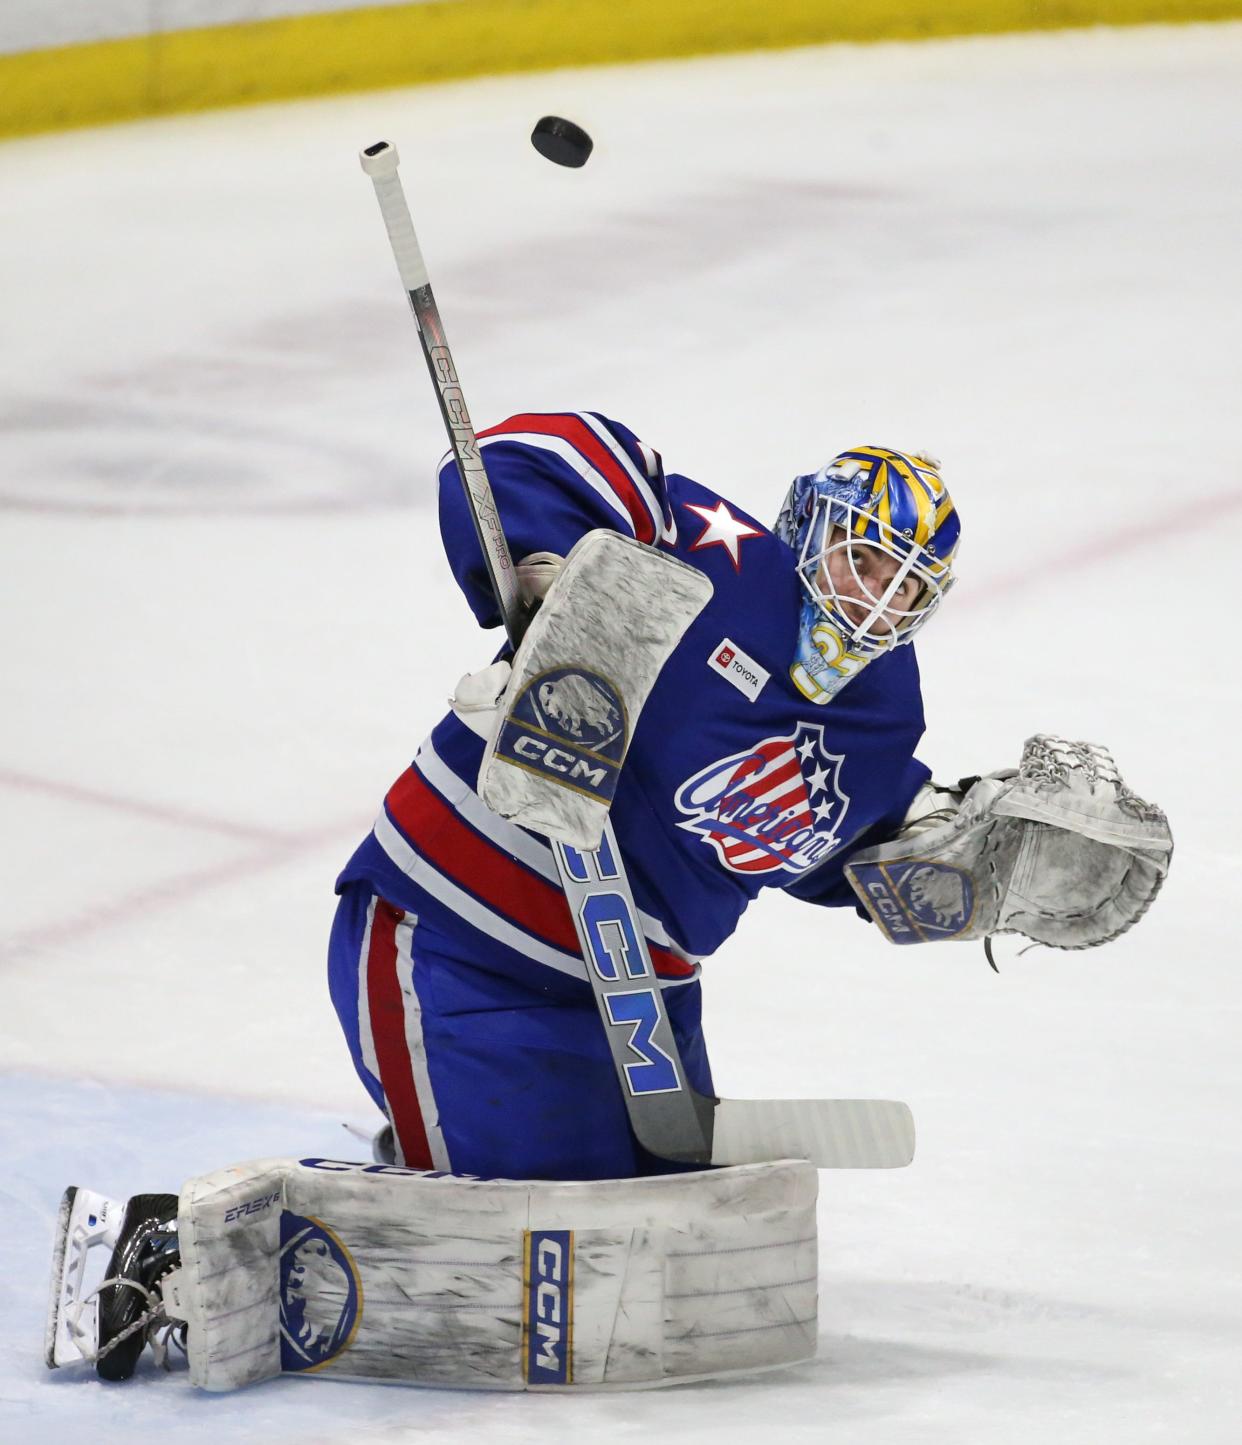 Devon Levi had a superb game in net for the Amerks.